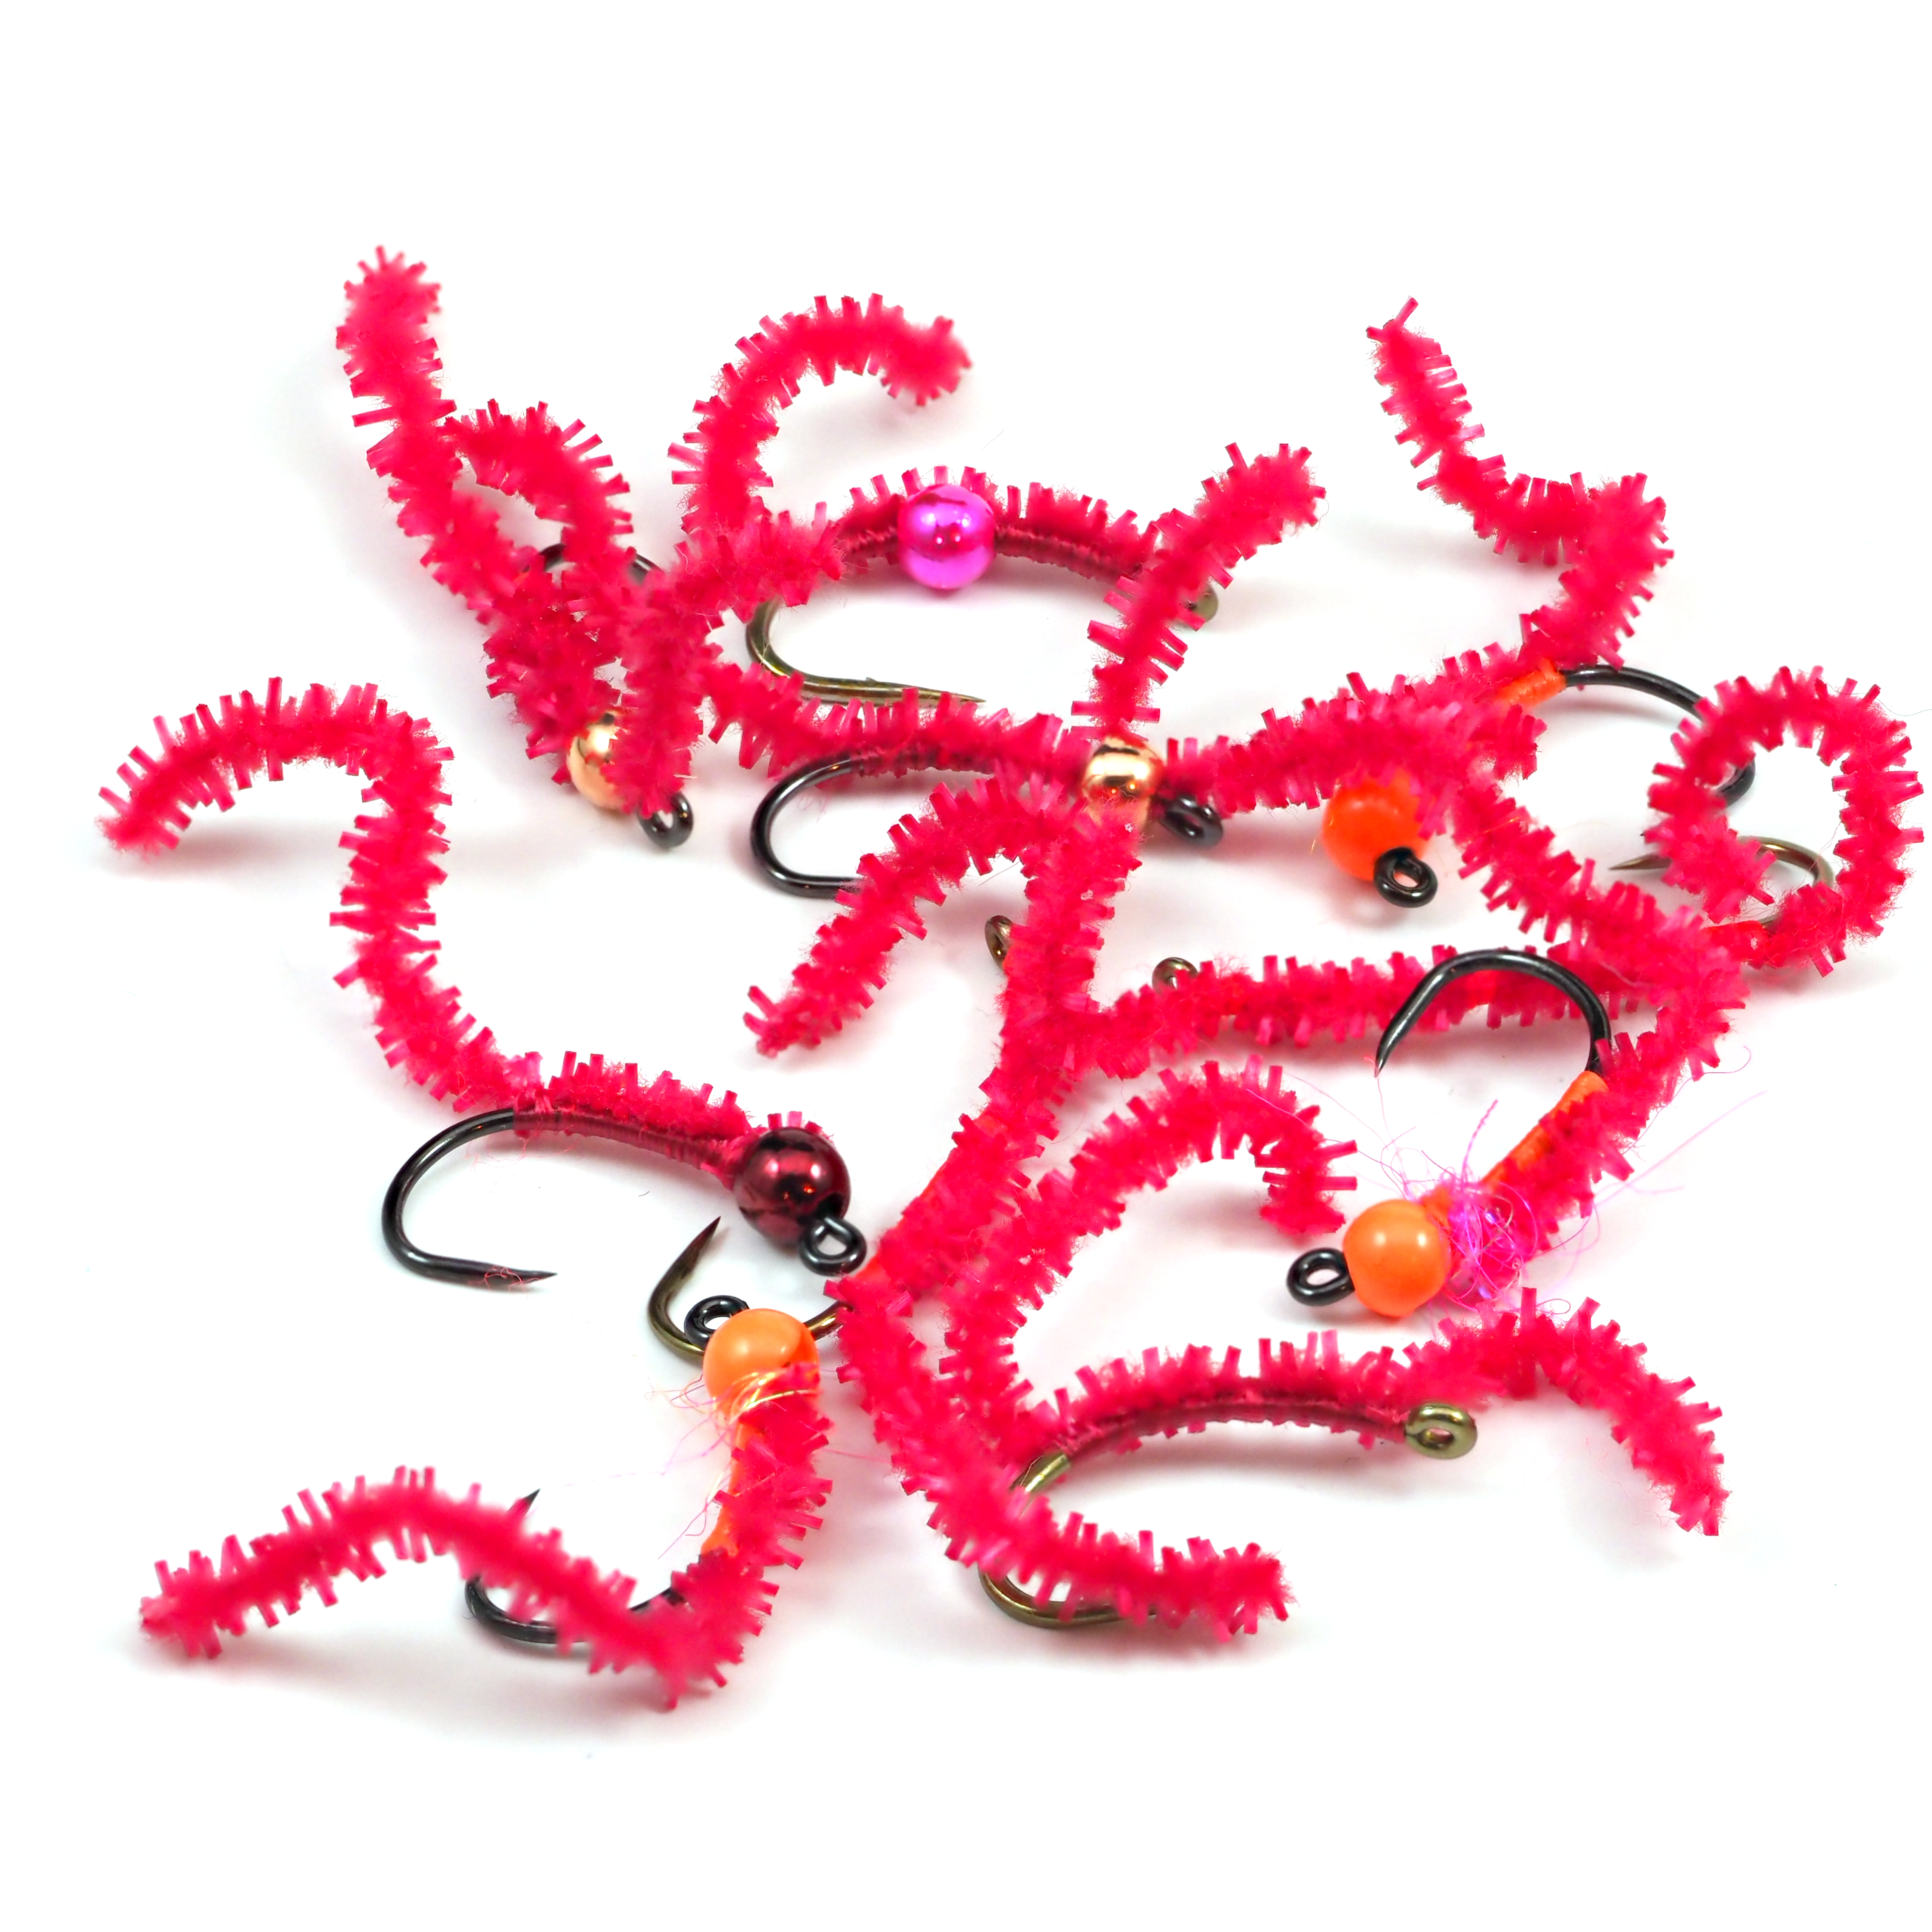 Fly Tie Tuesday - Stretch Chenille Worms - Oct/20/2020 – Fish Tales Fly Shop